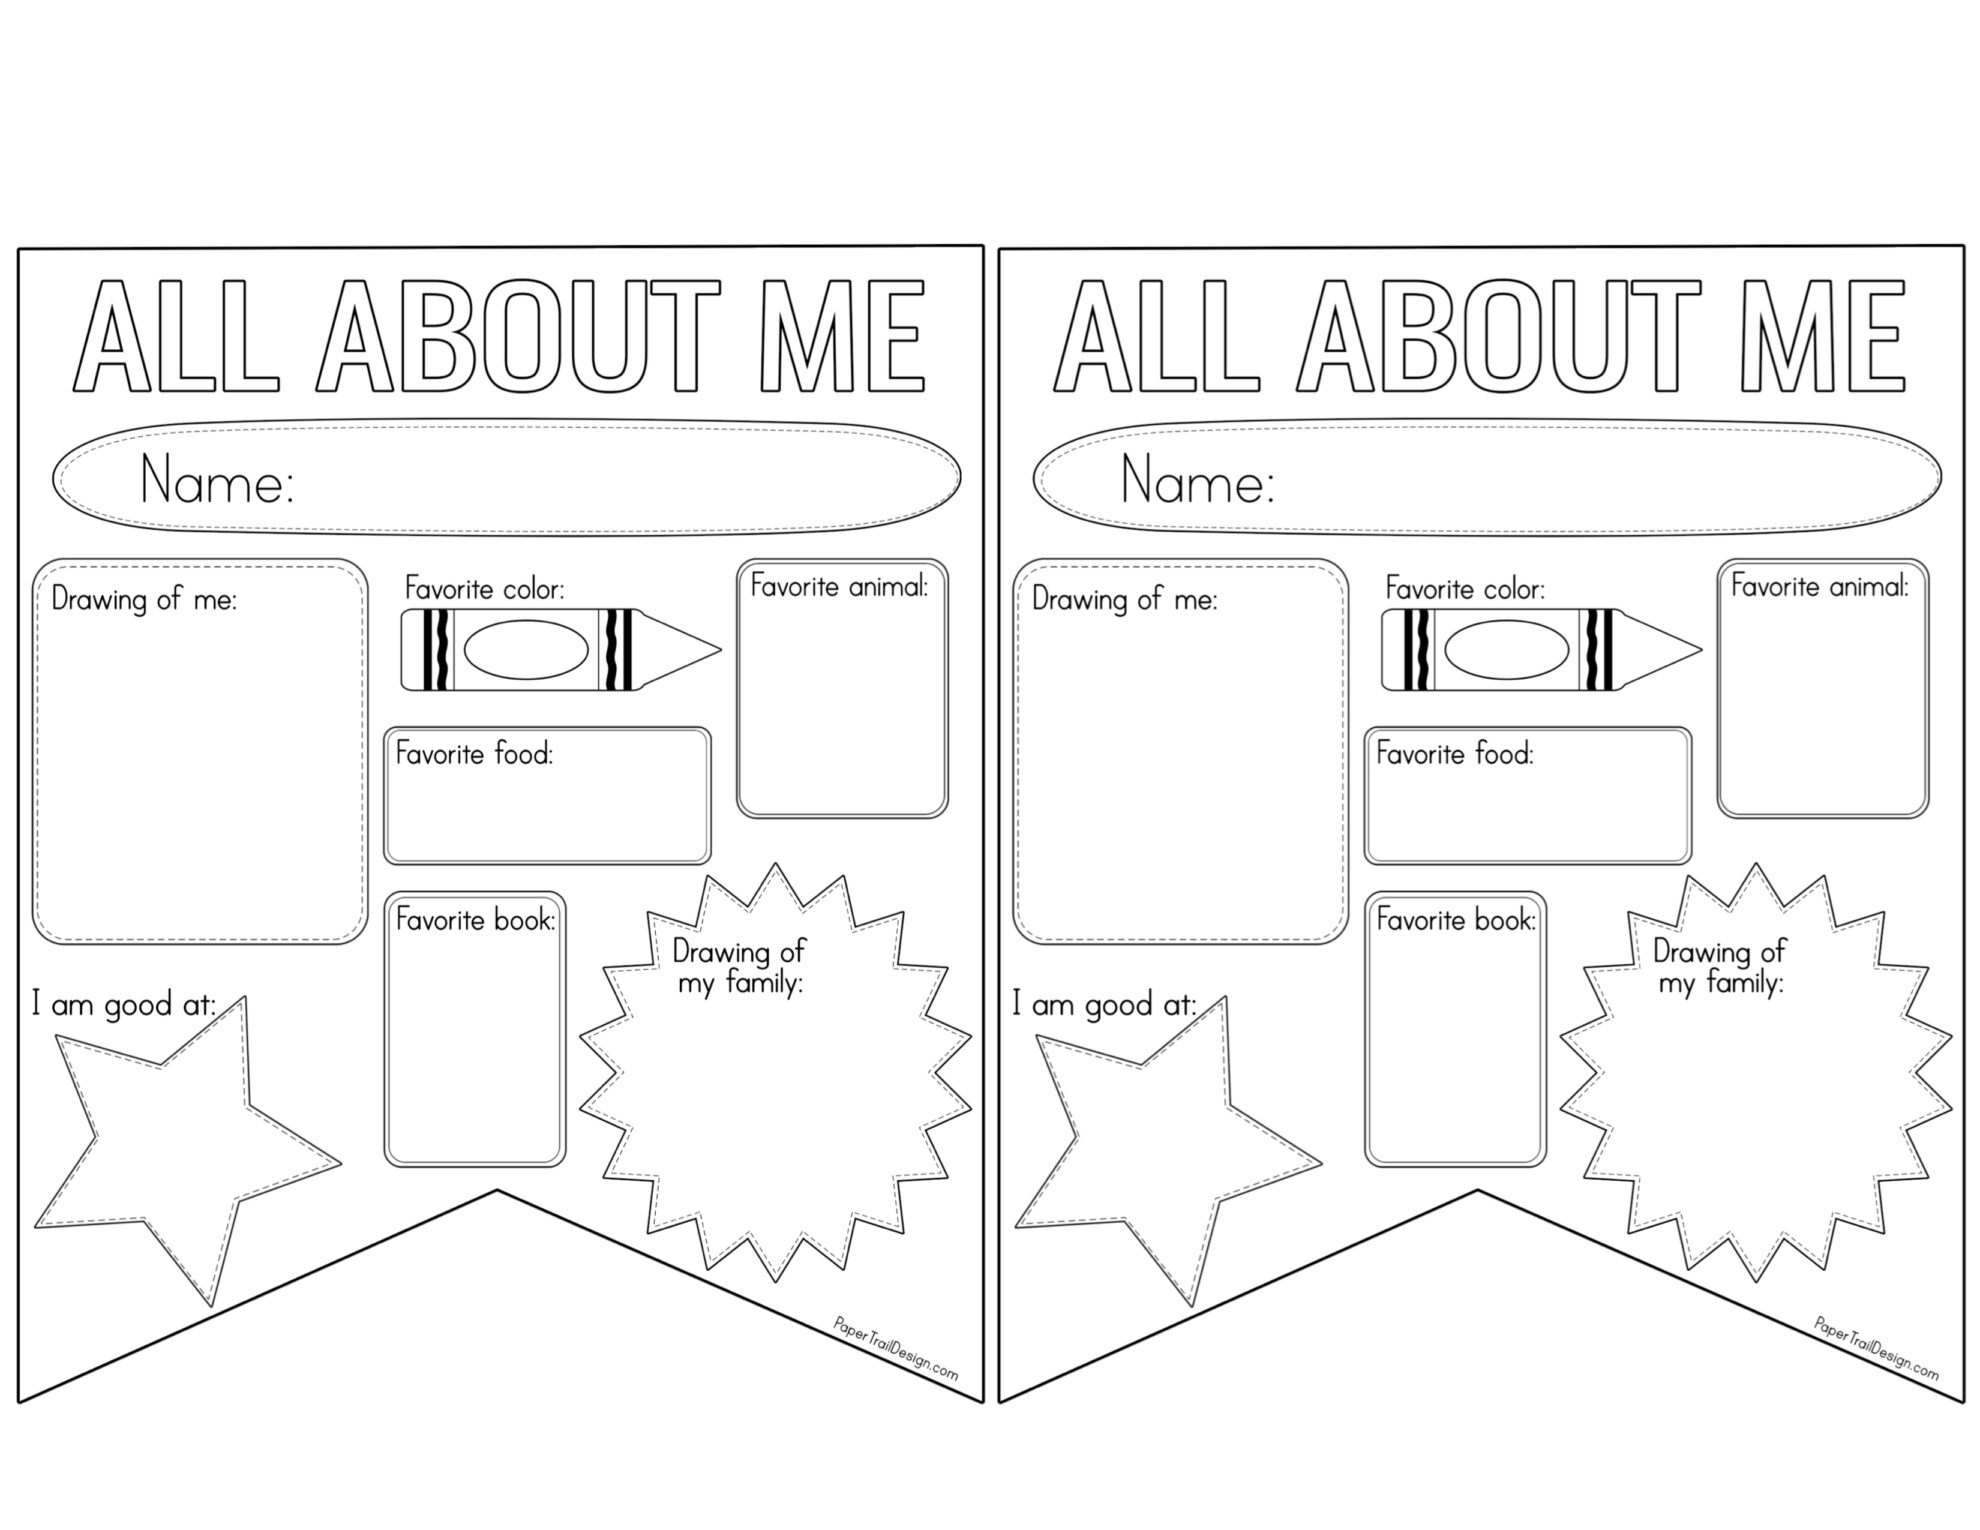 All About Me Worksheet Printable - Paper Trail Design Throughout All About Me Worksheet Preschool